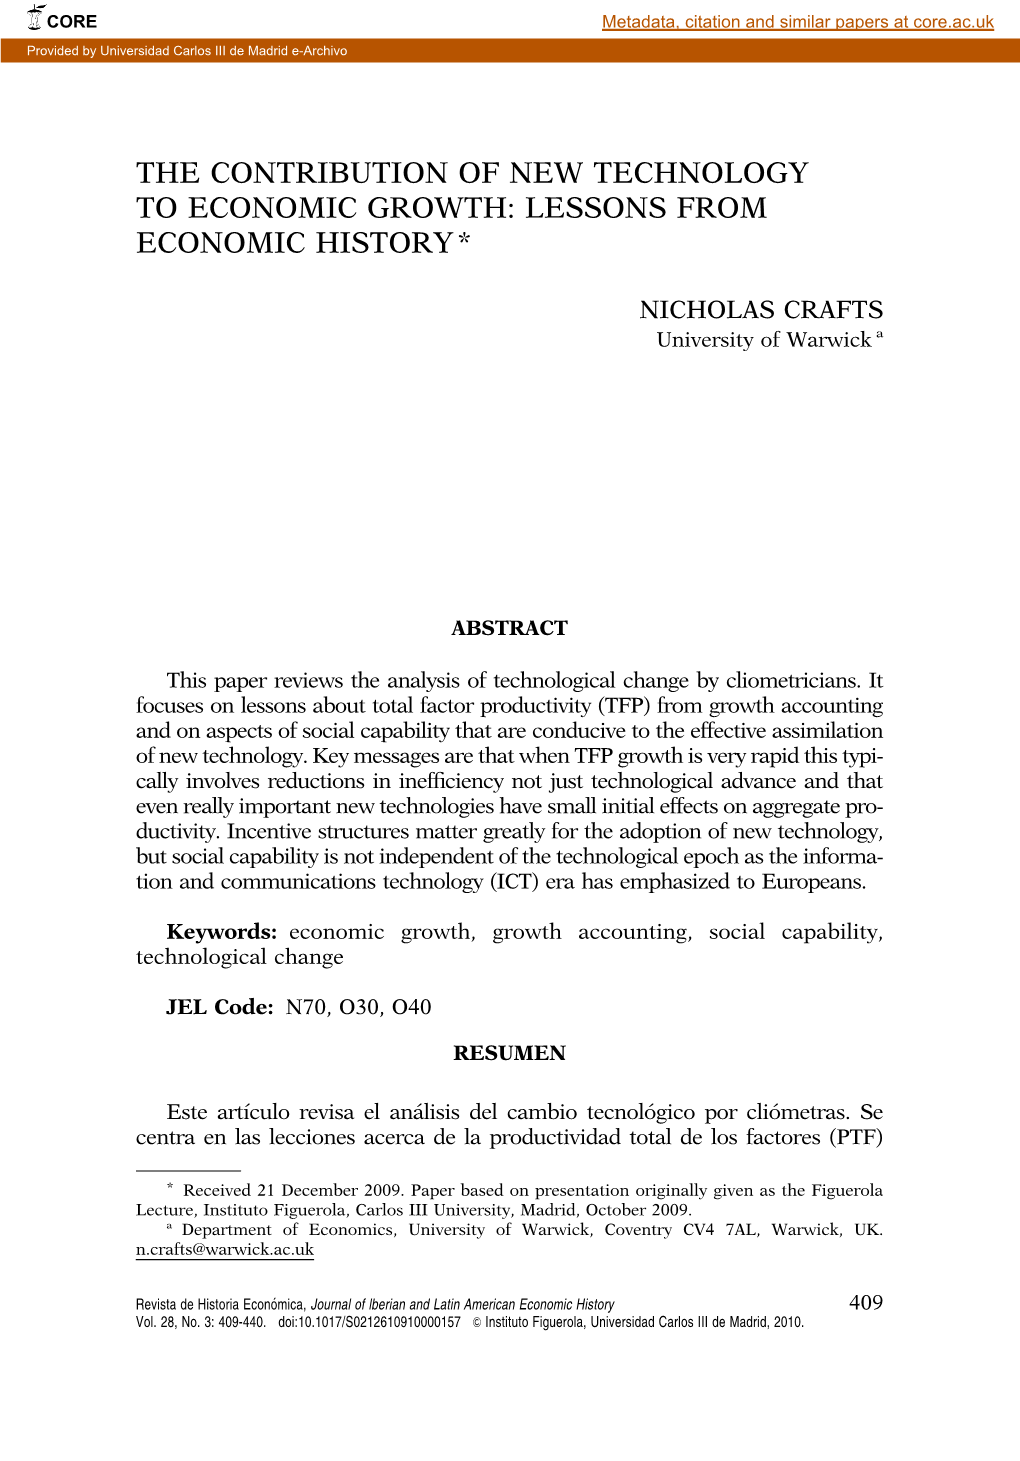 The Contribution of New Technology to Economic Growth: Lessons from Economic History*